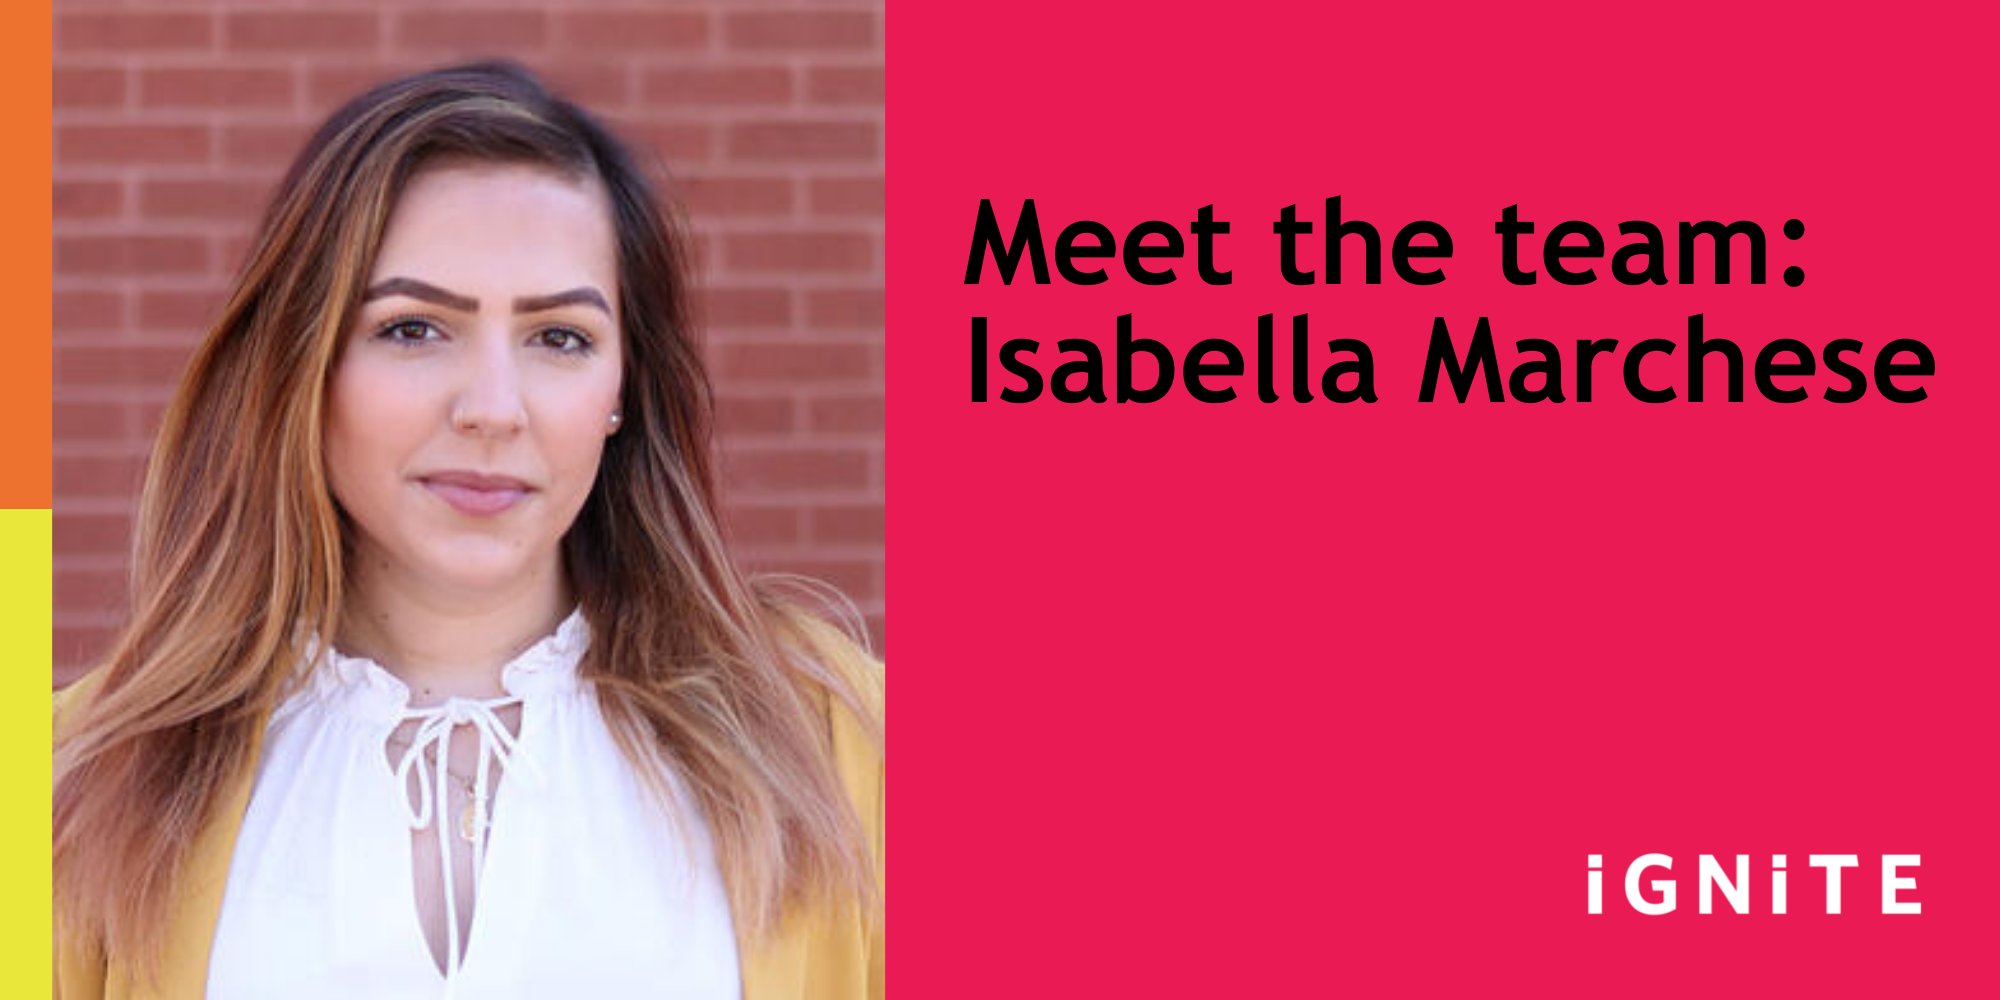 Meet Isabella Marchese, IGNITE's Social Media Manager